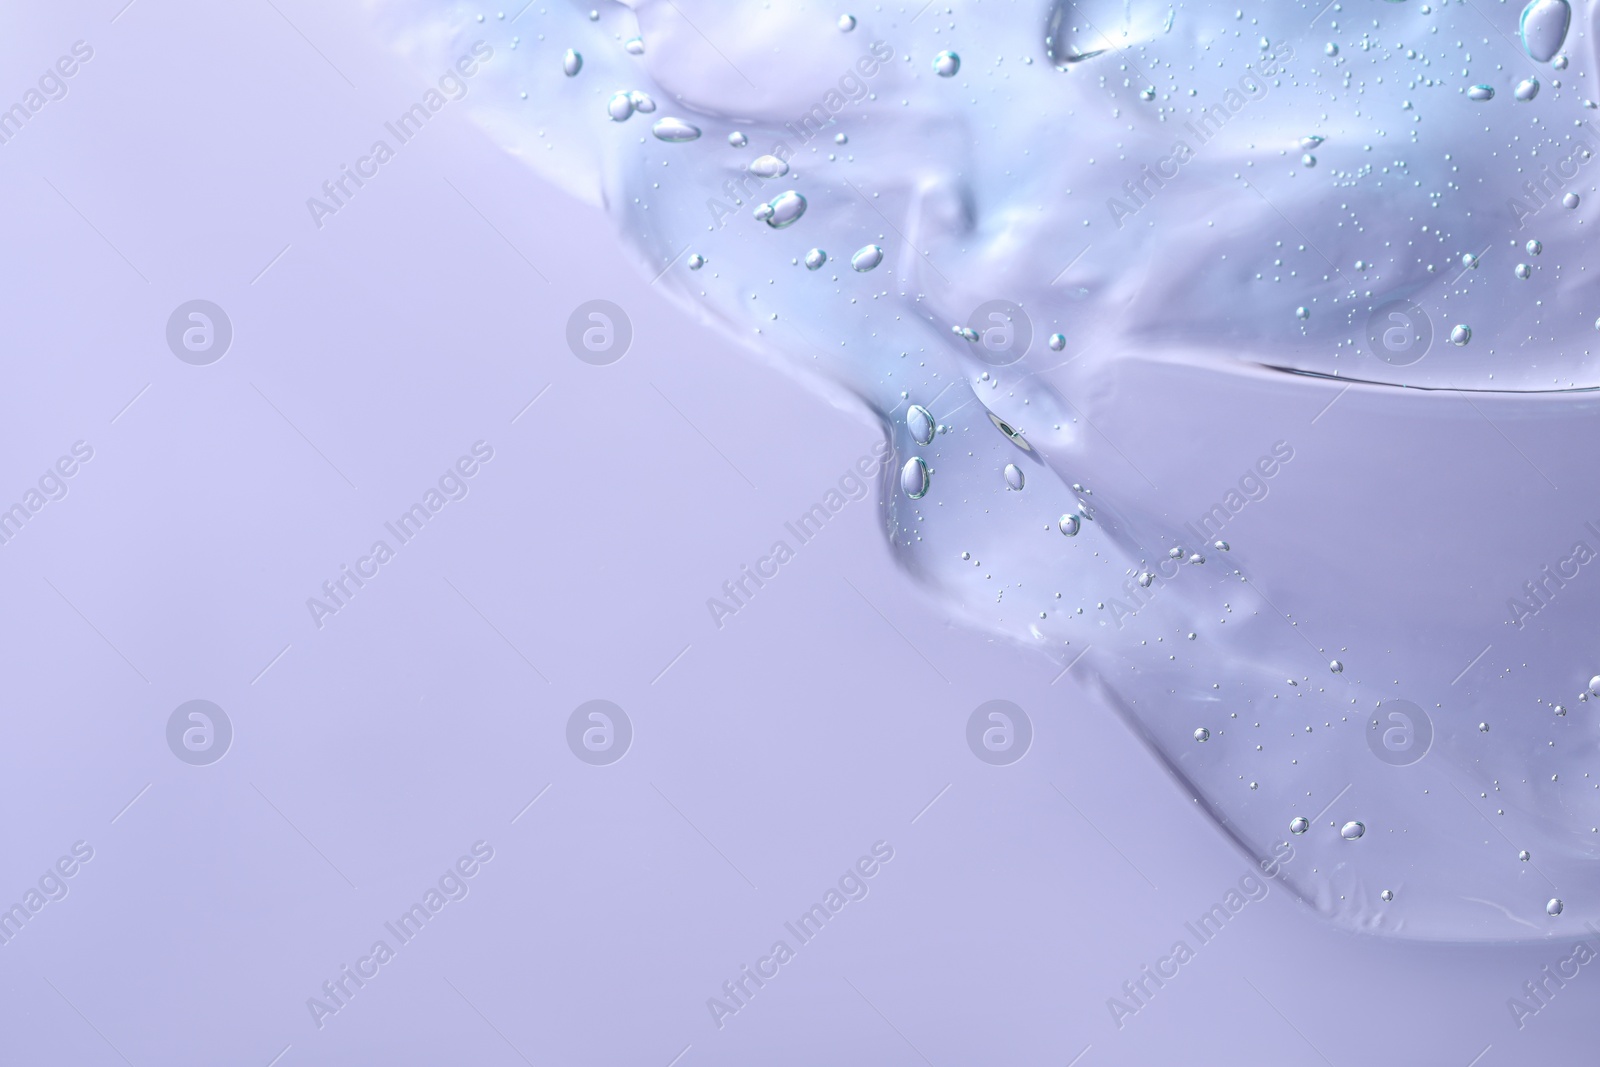 Photo of Transparent cleansing gel on violet background, top view with space for text. Cosmetic product